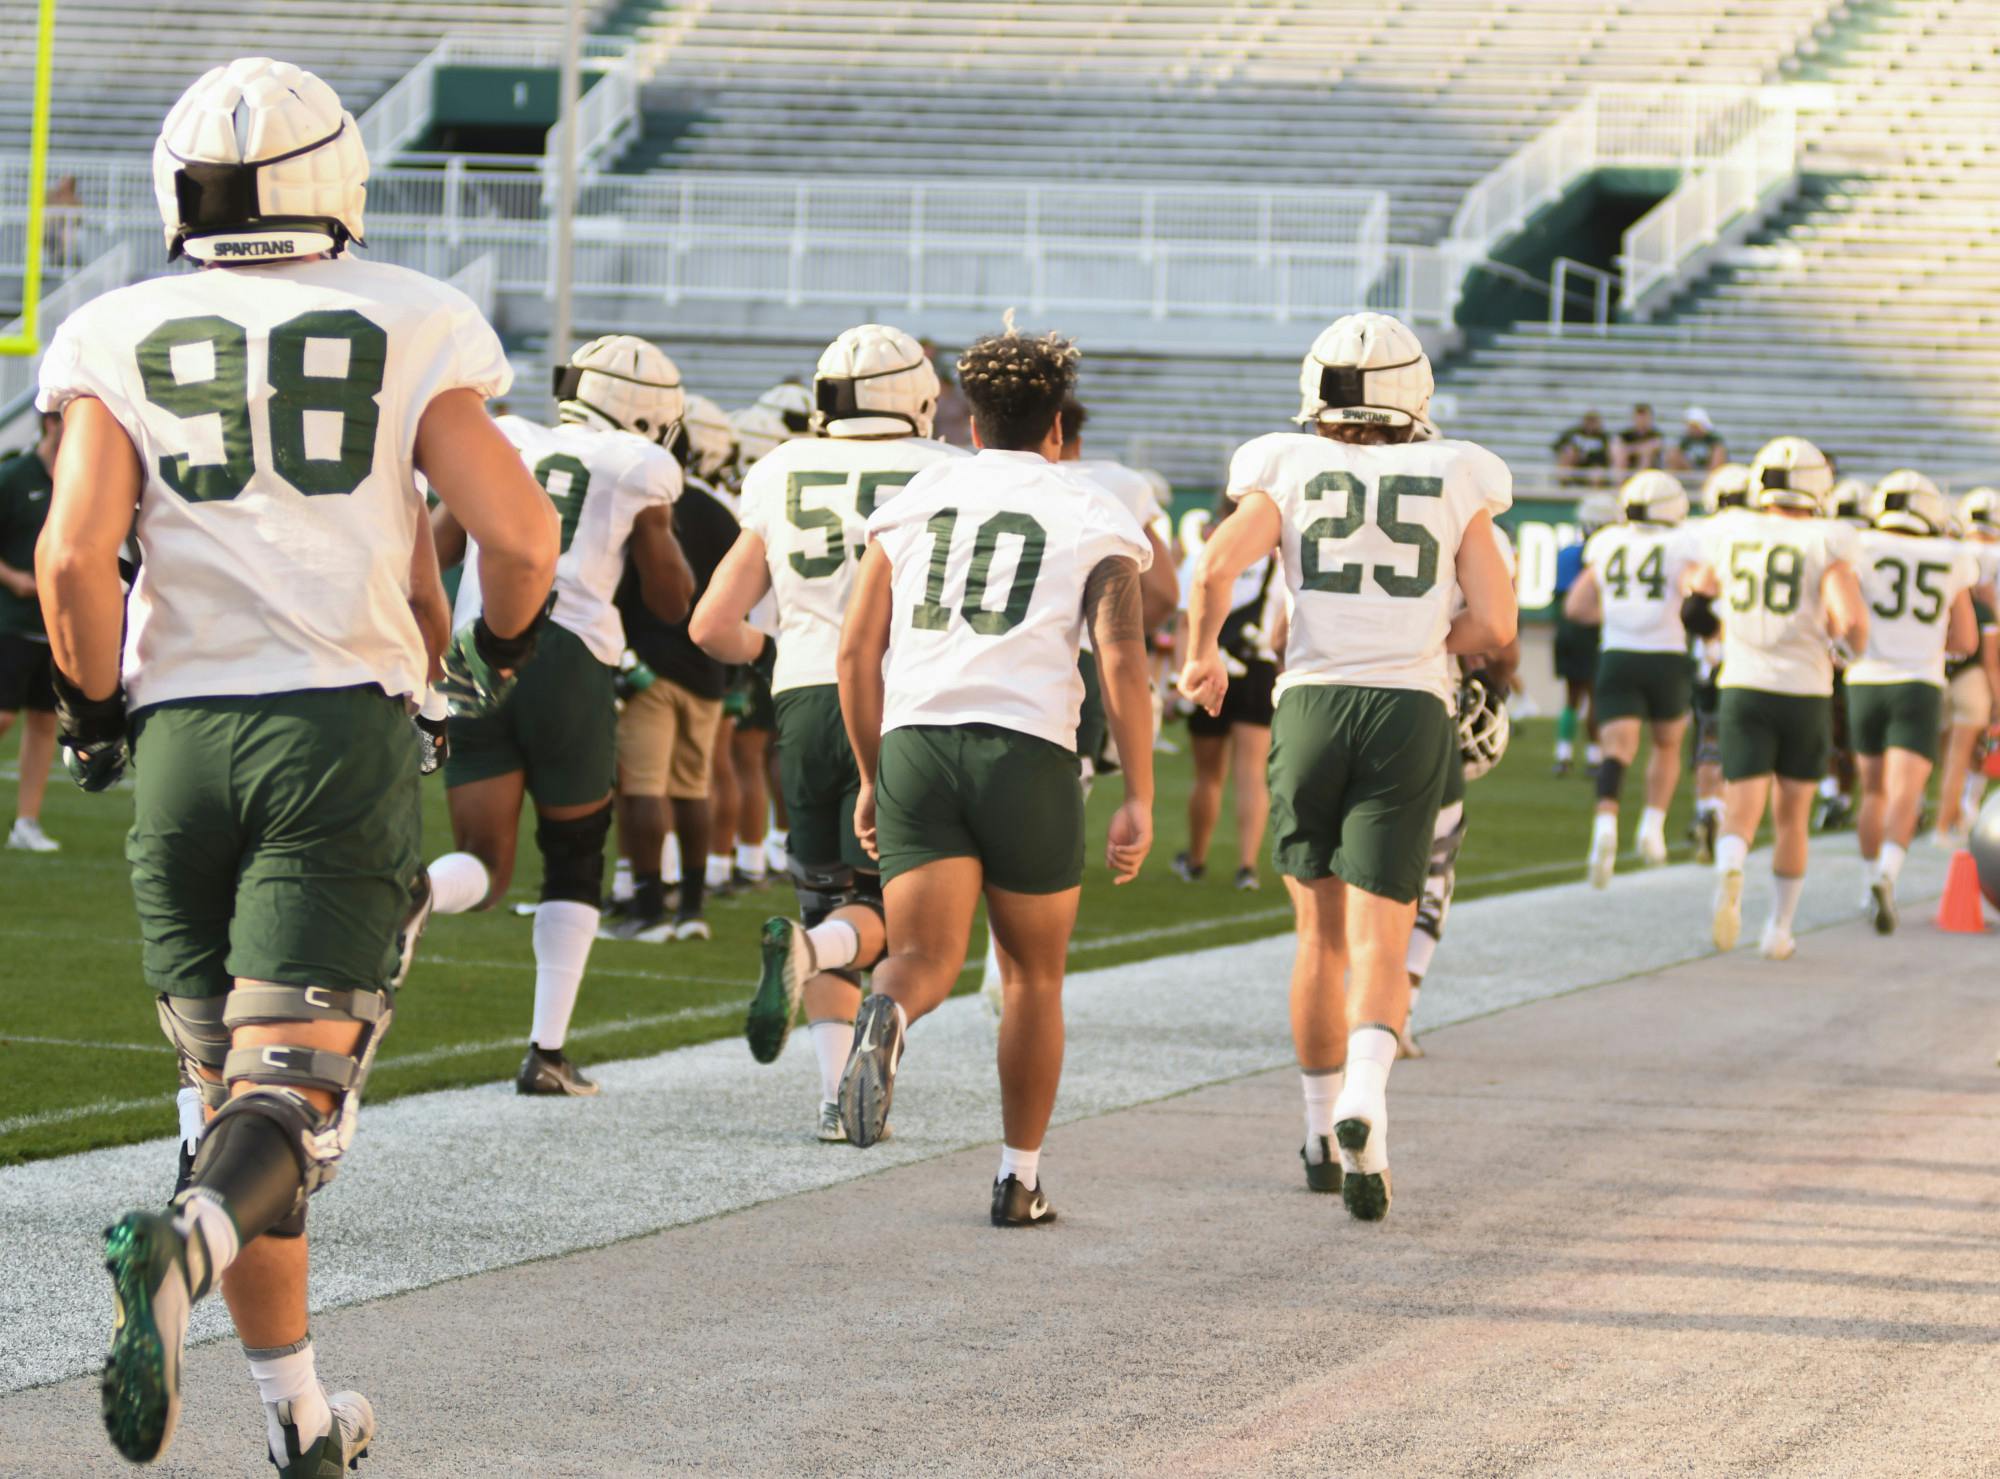 <p>The Michigan State football team invited fans to Spartan Stadium on Monday, Aug. 24, for their annual &quot;Meet the Spartans&quot; event. </p>